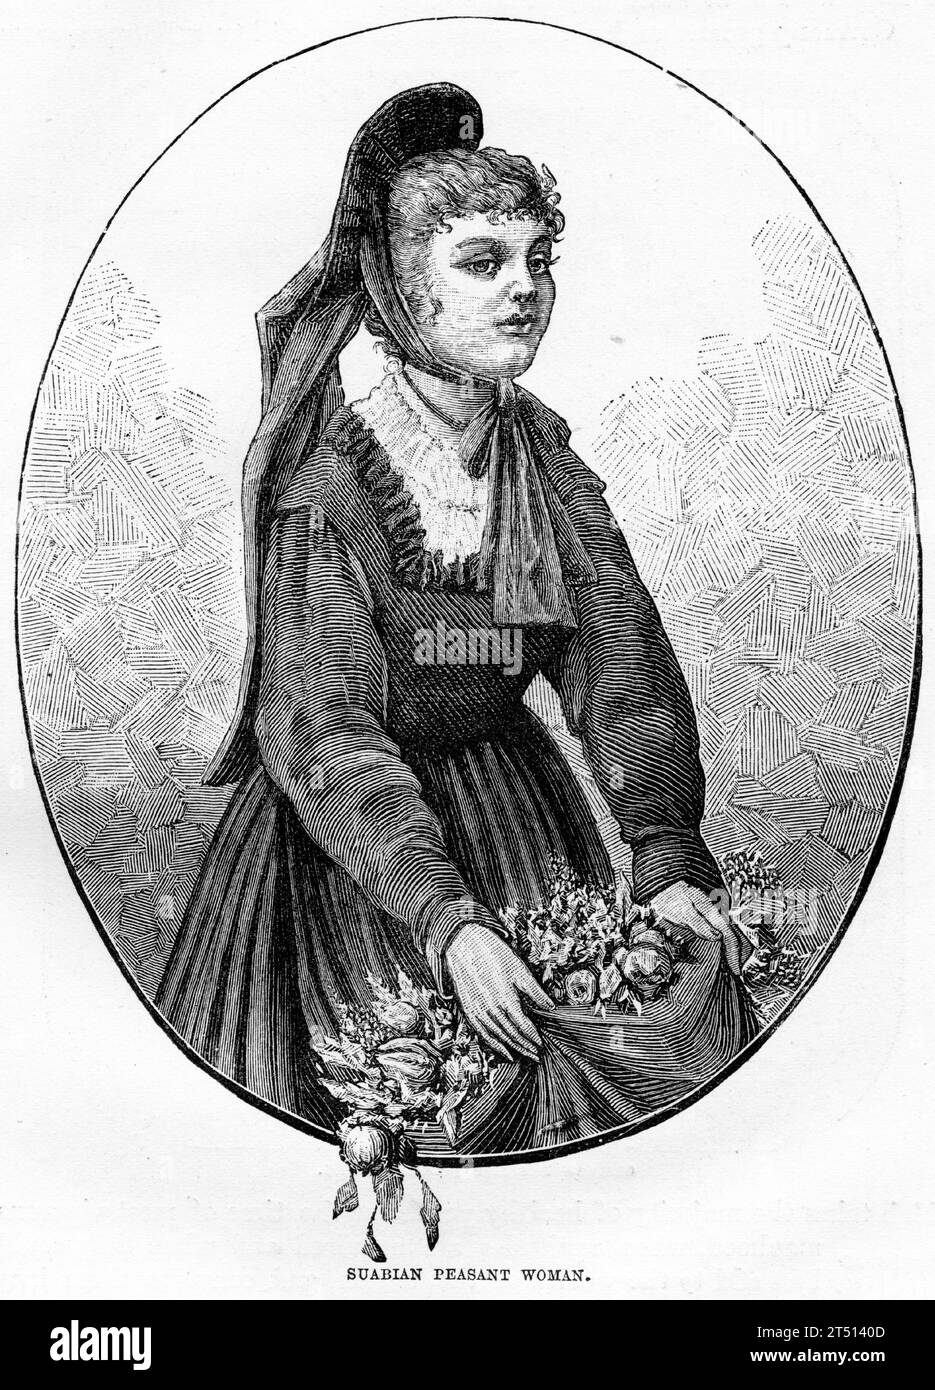 Engraved portrait of a Suarian peasant woman in traditional costume. Published circa 1887 Stock Photo